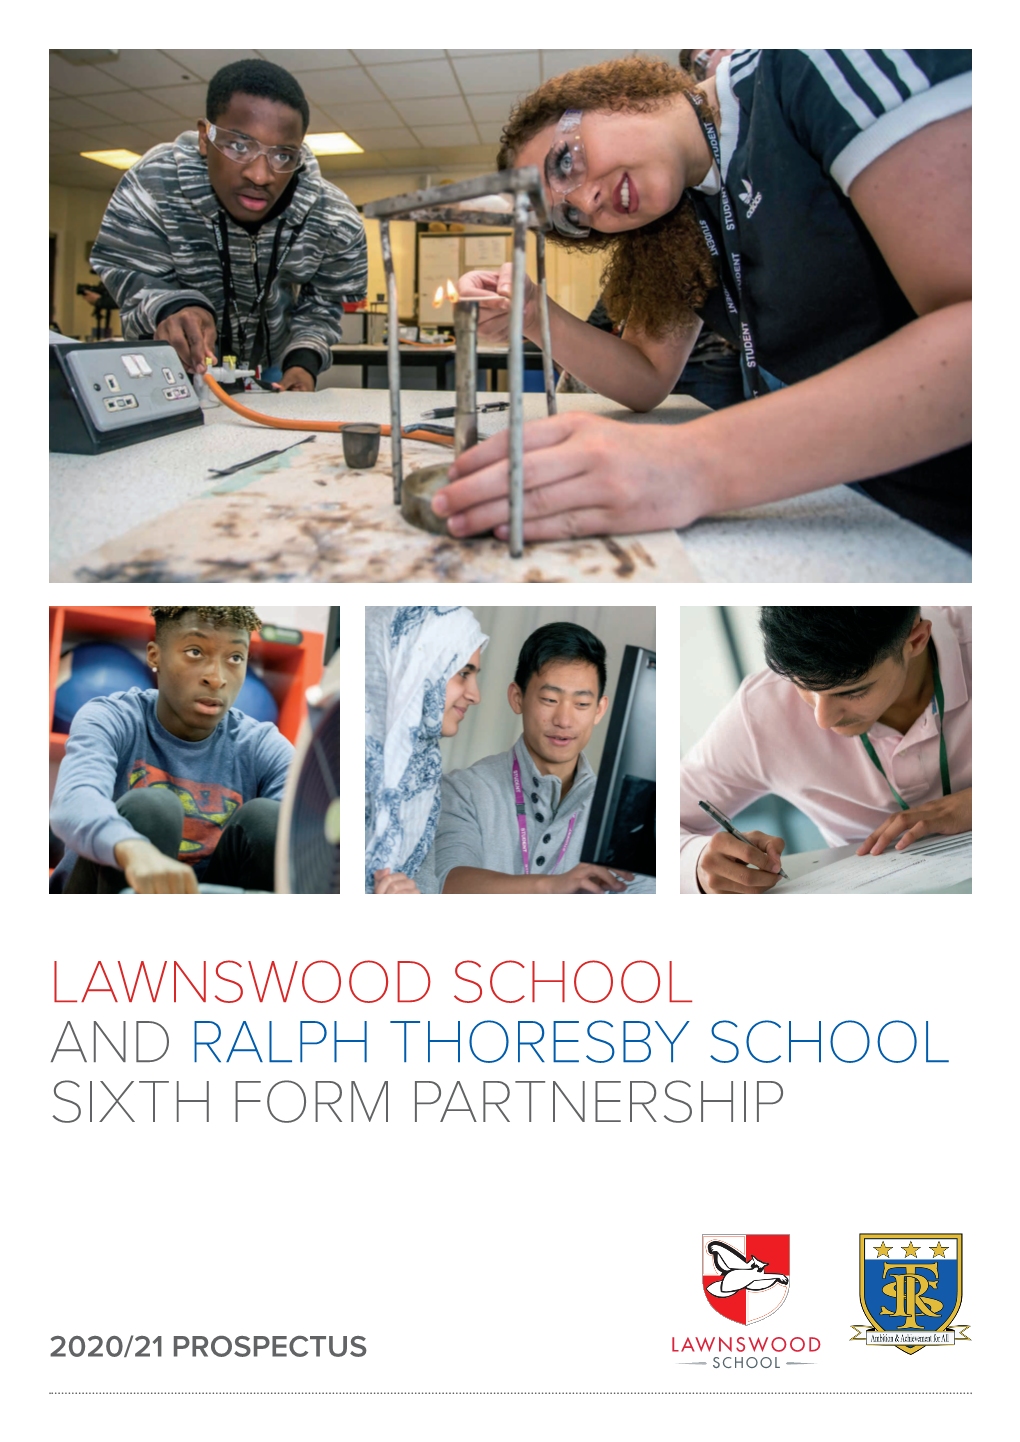 Lawnswood School and Ralph Thoresby School Sixth Form Partnership